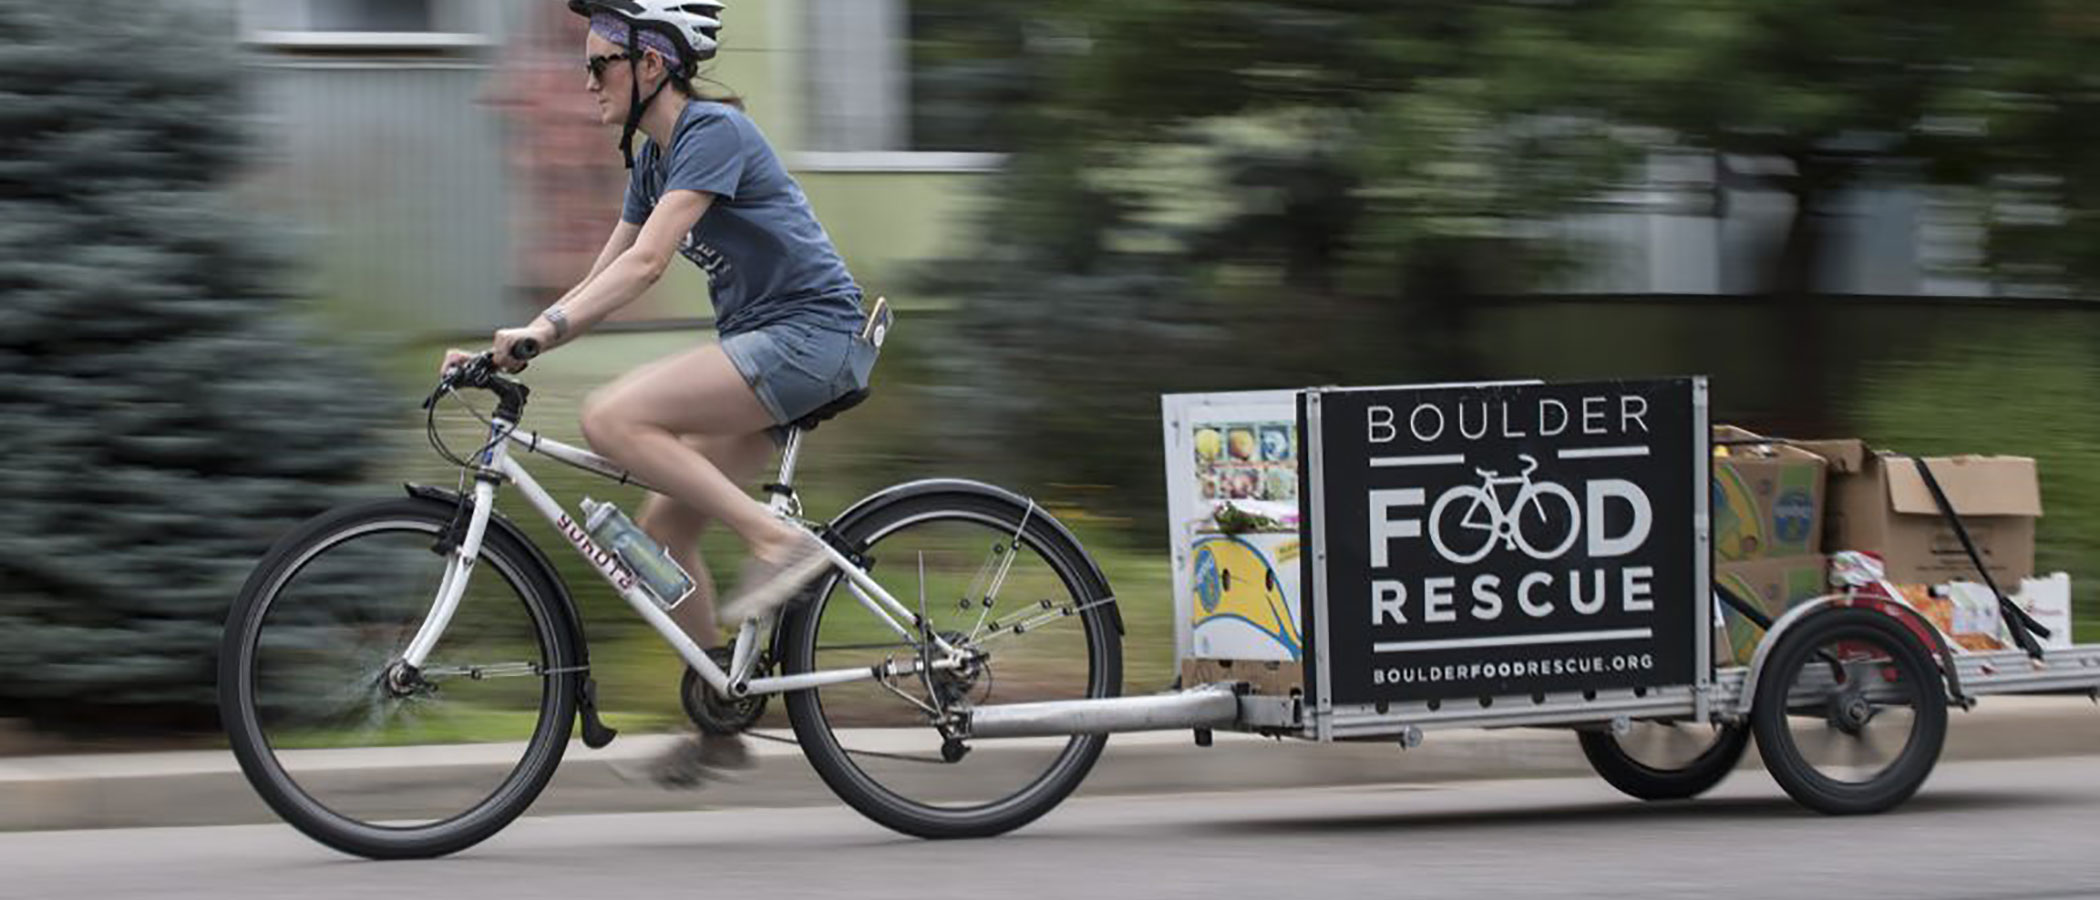 Boulder Food Rescue redistributes food to low-income communities by bicycle.